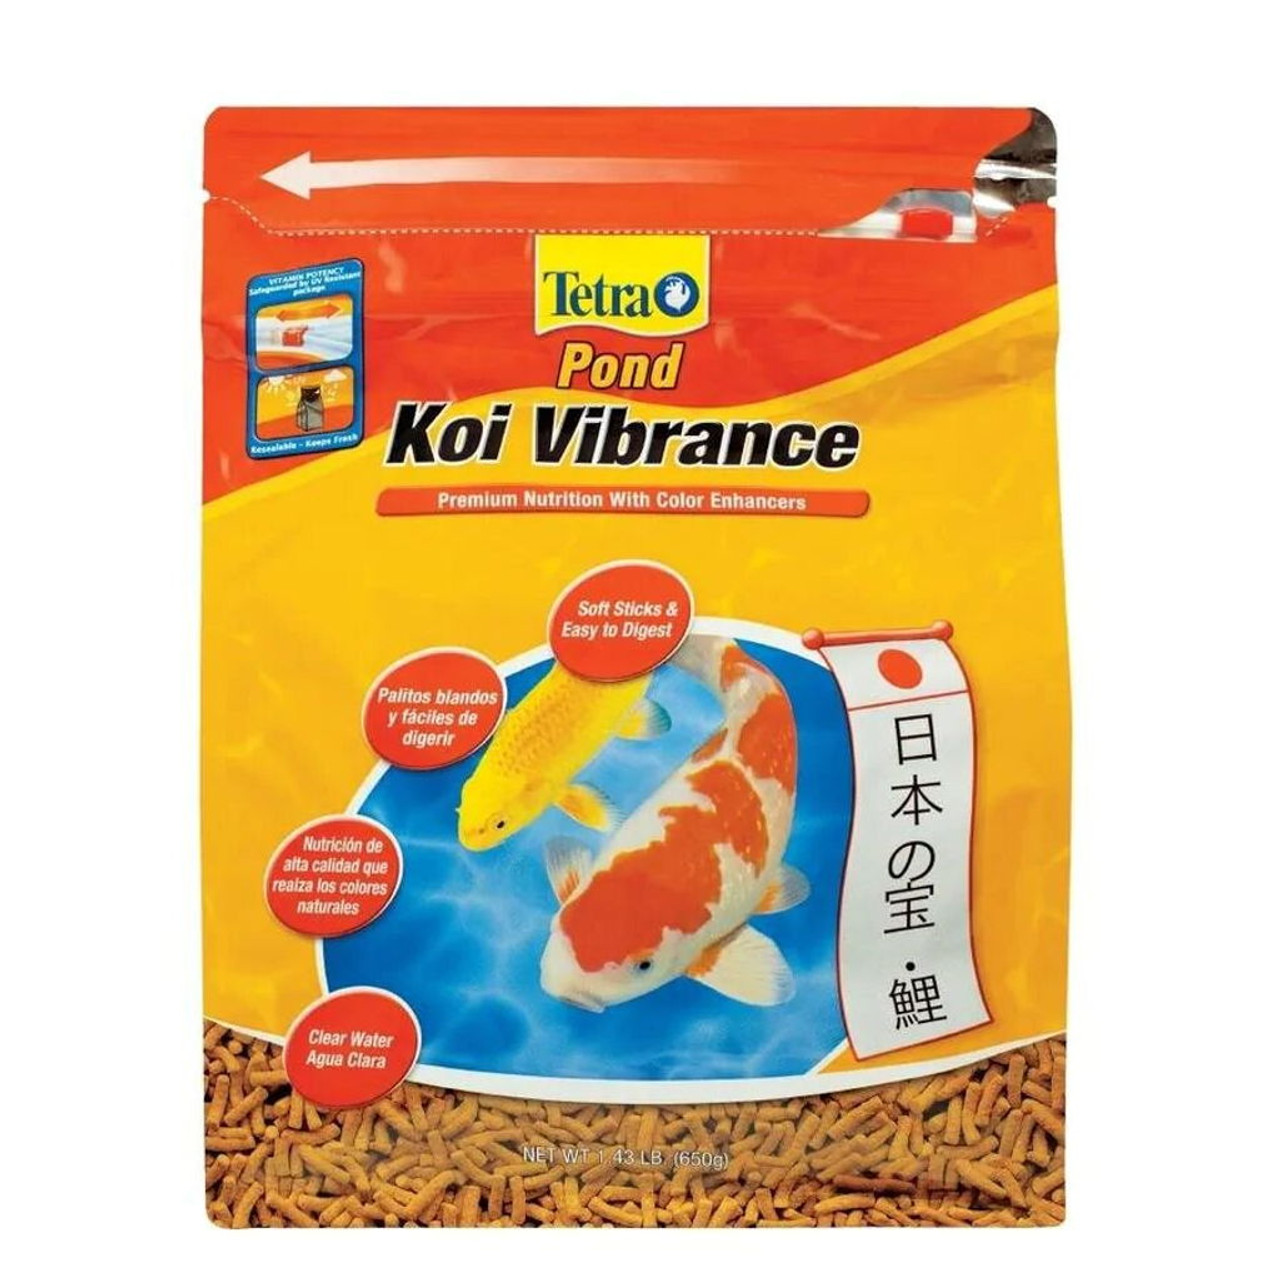 Tetra Koi Vibrance, 5.18 lbs. - Best Prices on Everything for